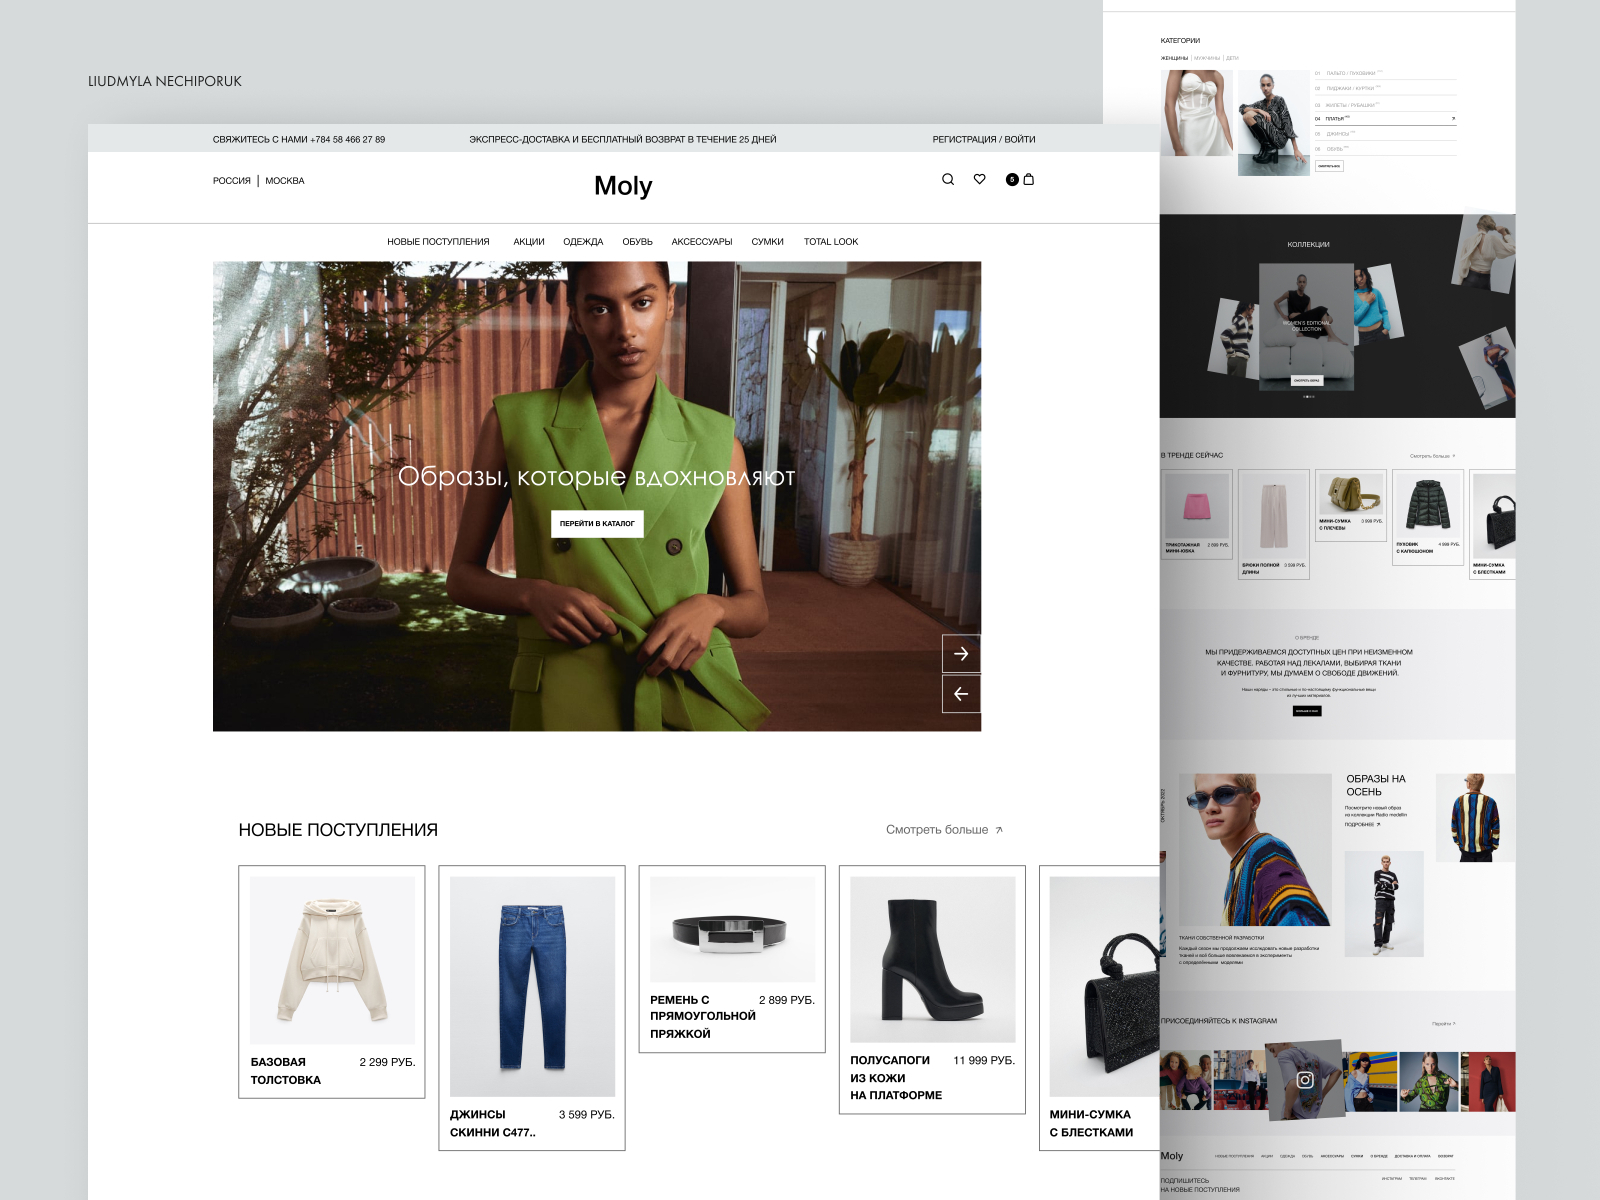 Online store - E Commerce by LusyWD on Dribbble